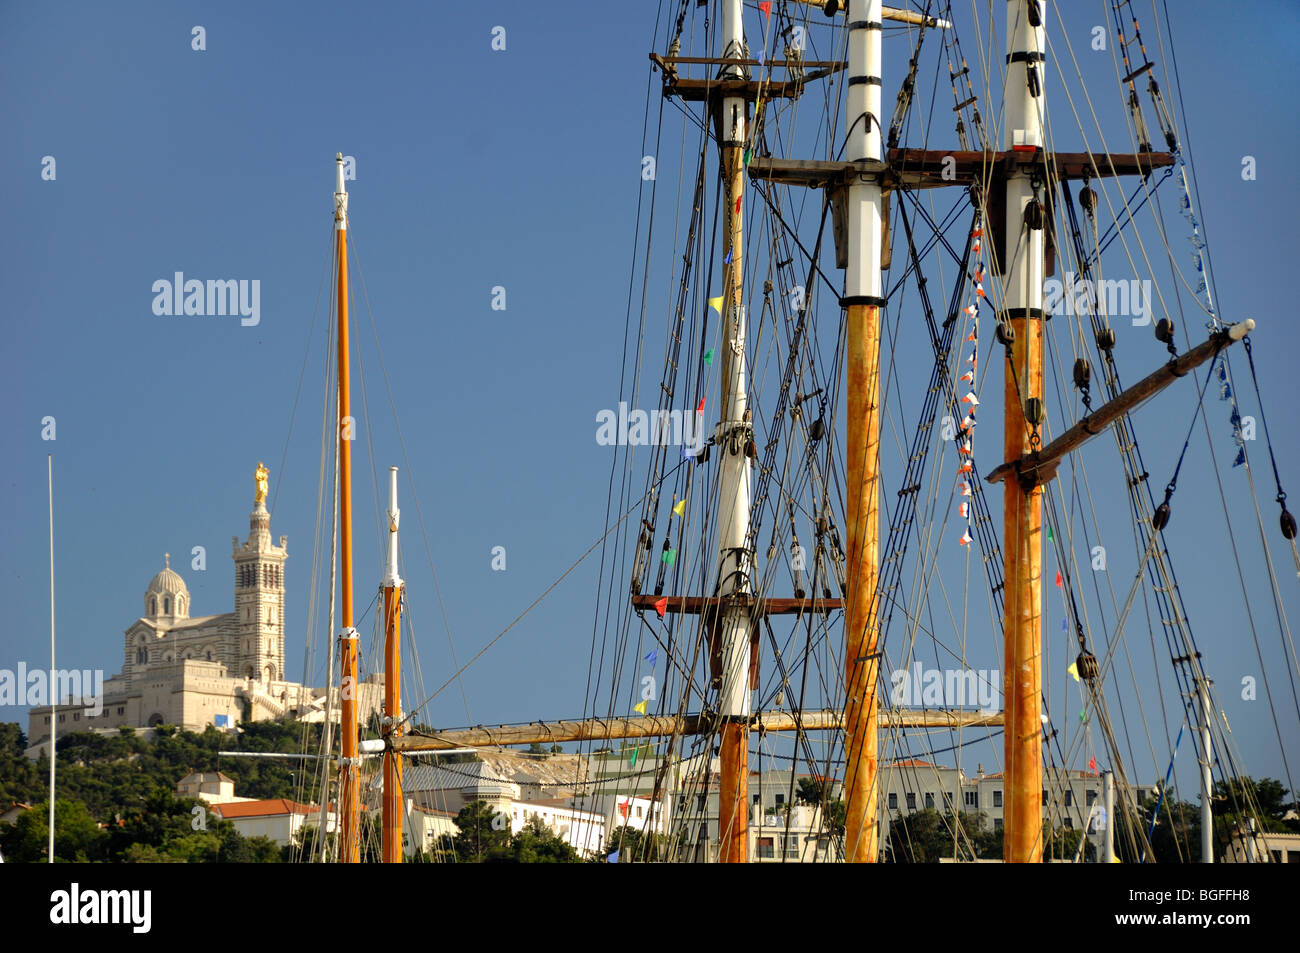 Notre-Dame de la Garde Church & Wooden Yacht Masts in Old Port, Vieux Port or Harbour, Marseille or Marseilles, Provence, France Stock Photo